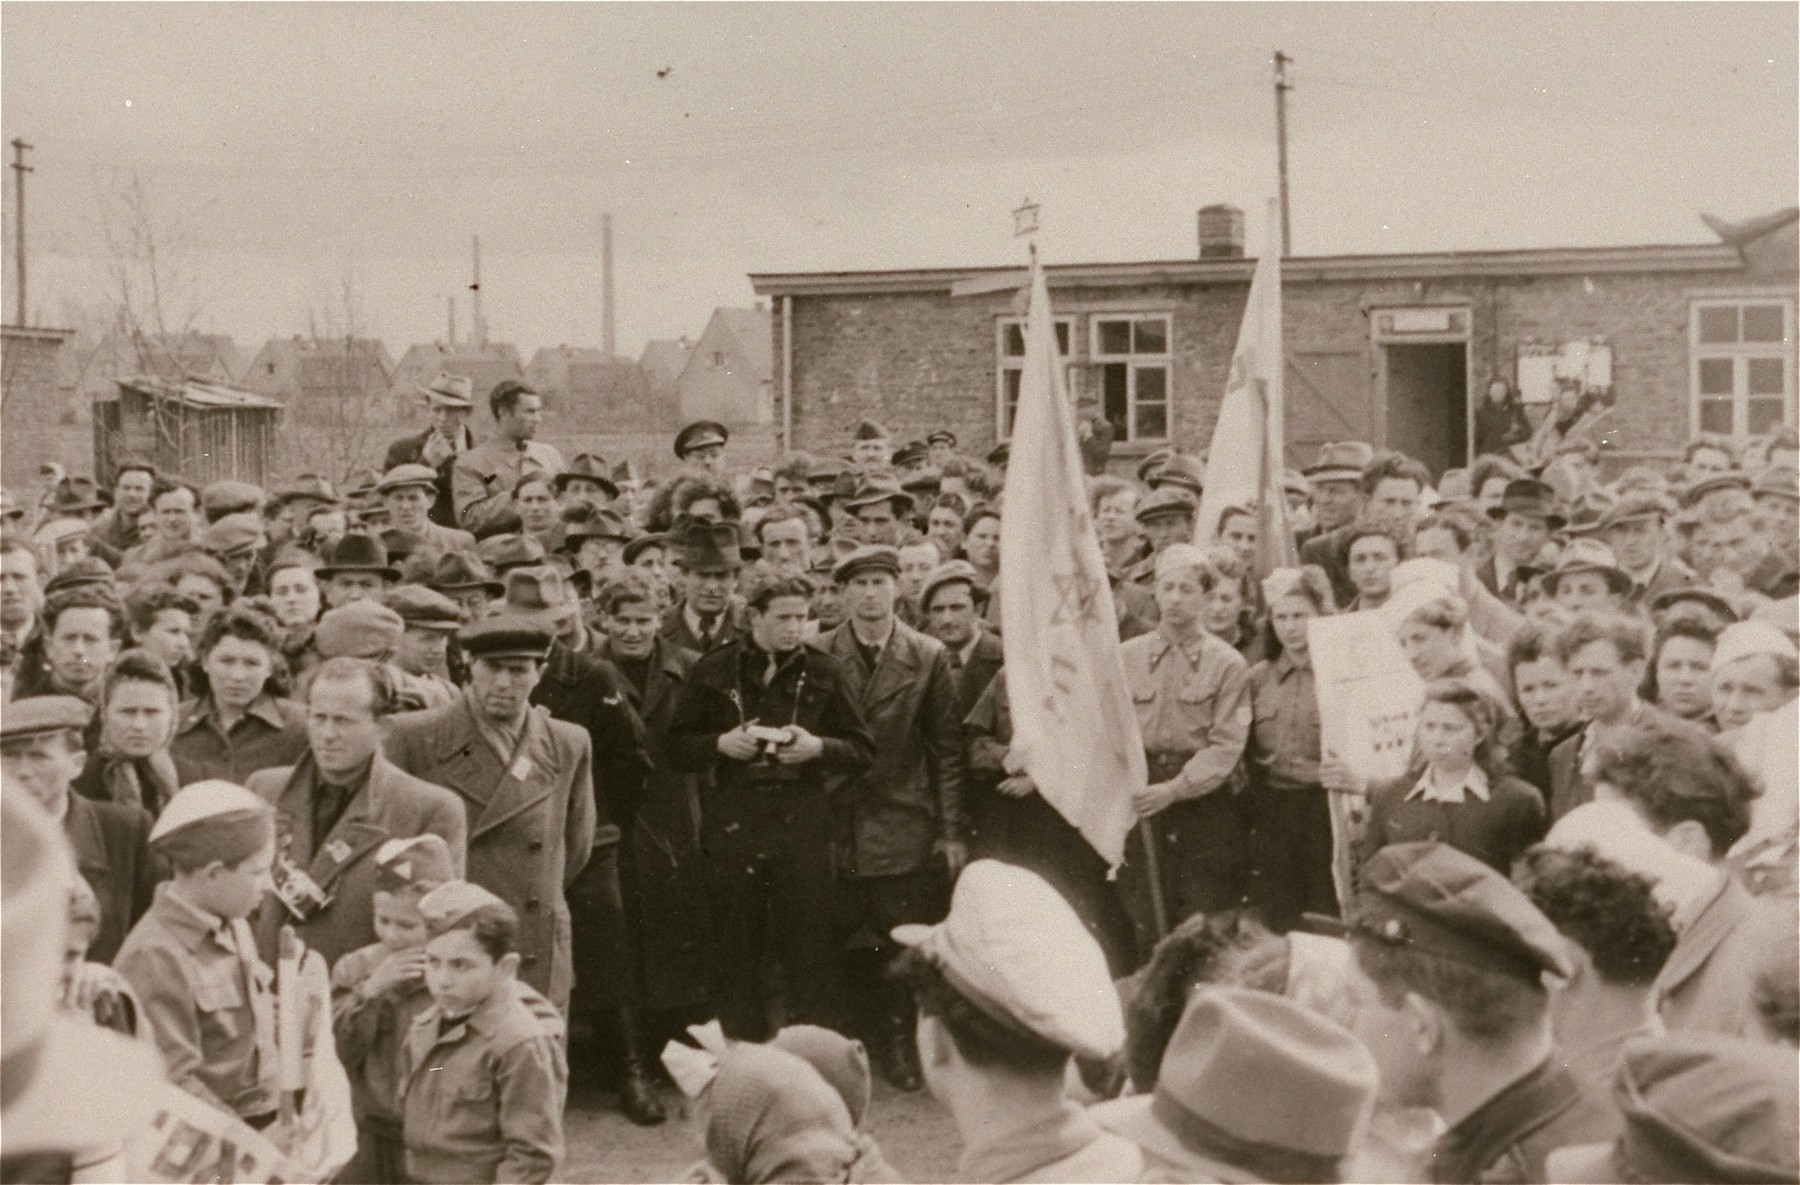 Jewish DPs at the Zeilsheim displaced persons camp hold a rally to promote free immigration to Palestine.